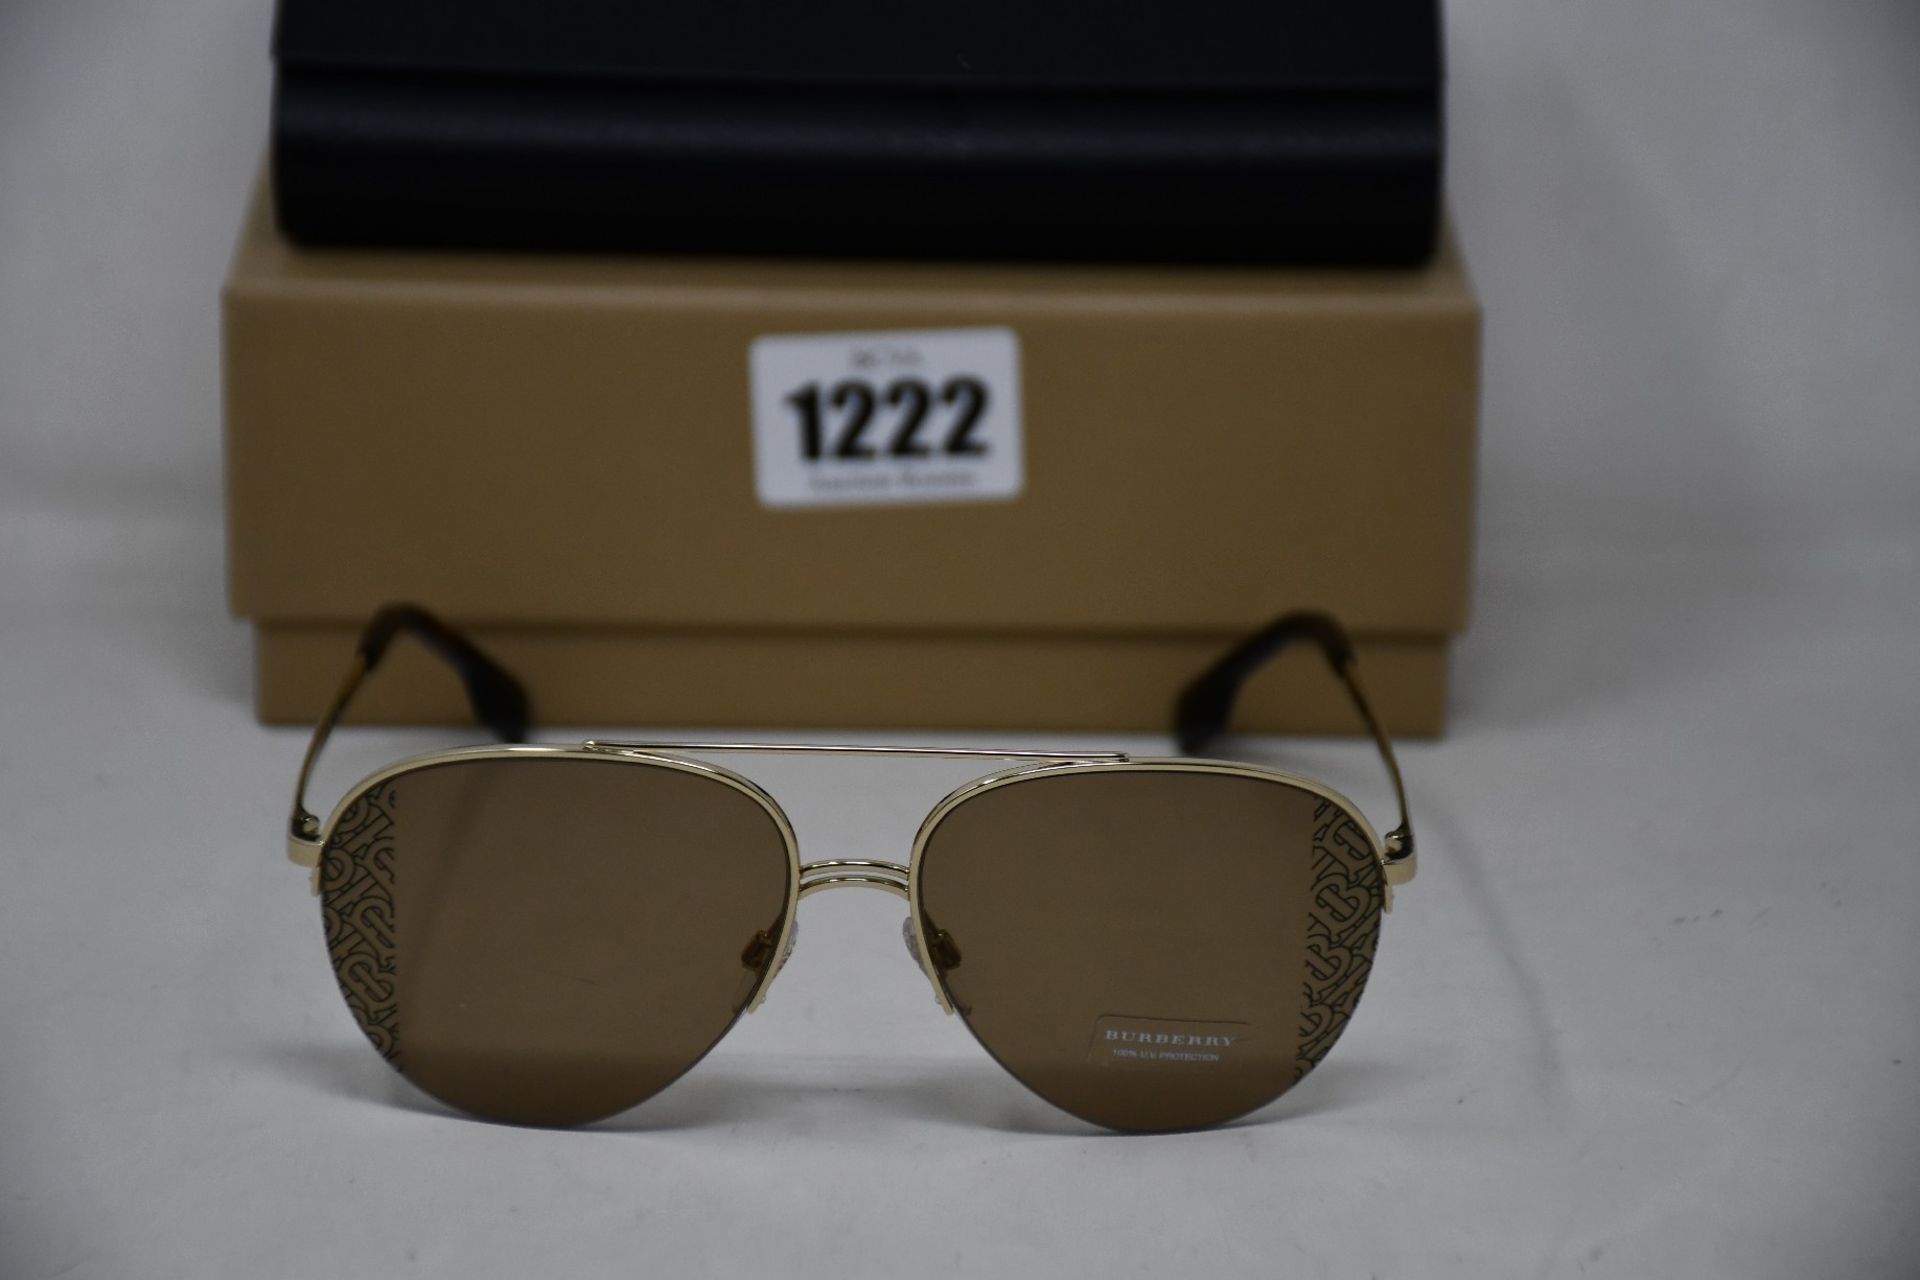 A pair of as new Burberry sunglasses.